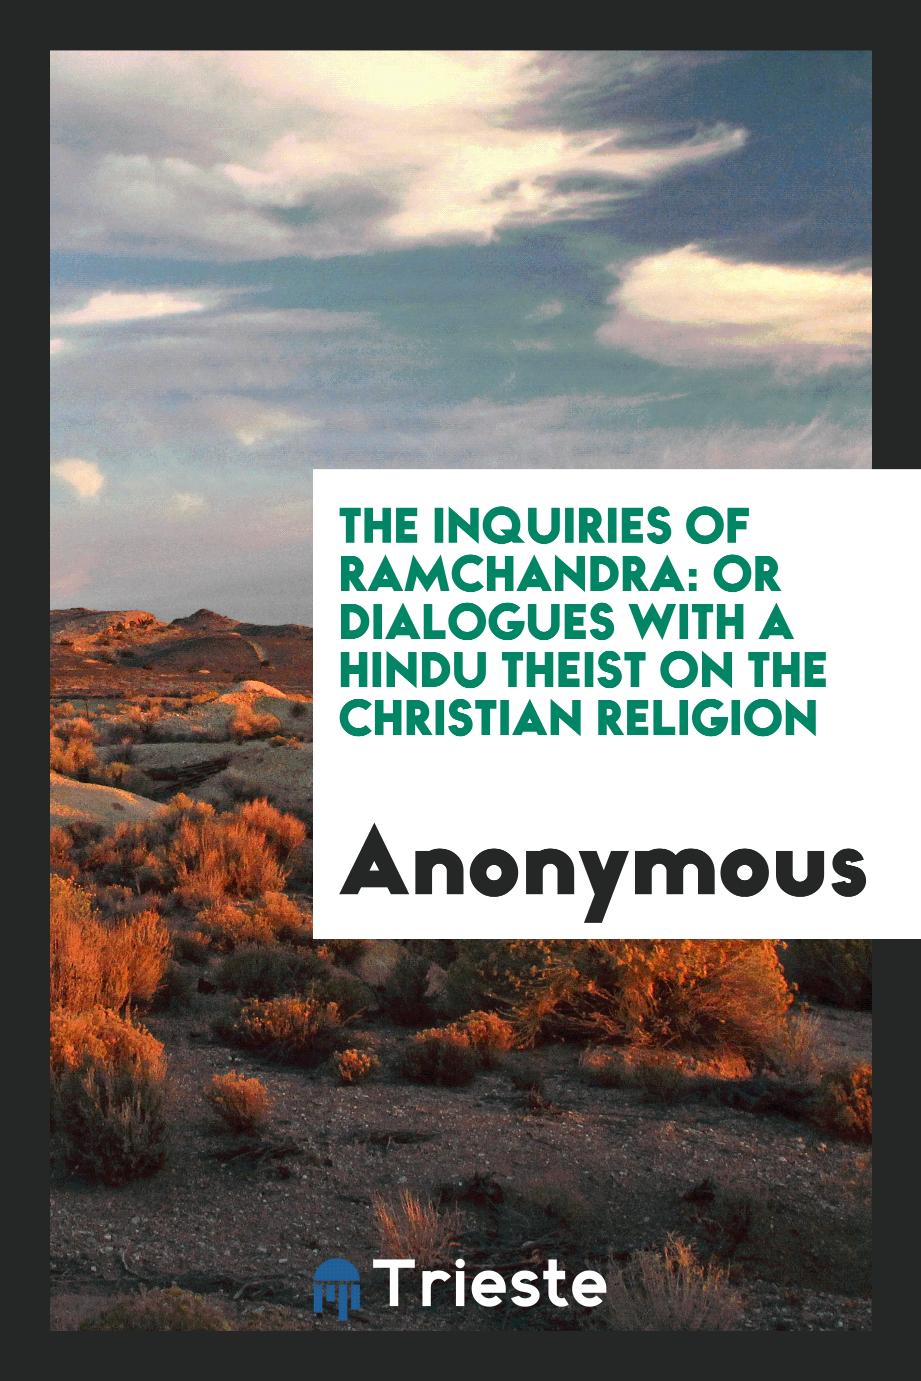 The Inquiries of Ramchandra: Or Dialogues with a Hindu Theist on the Christian Religion